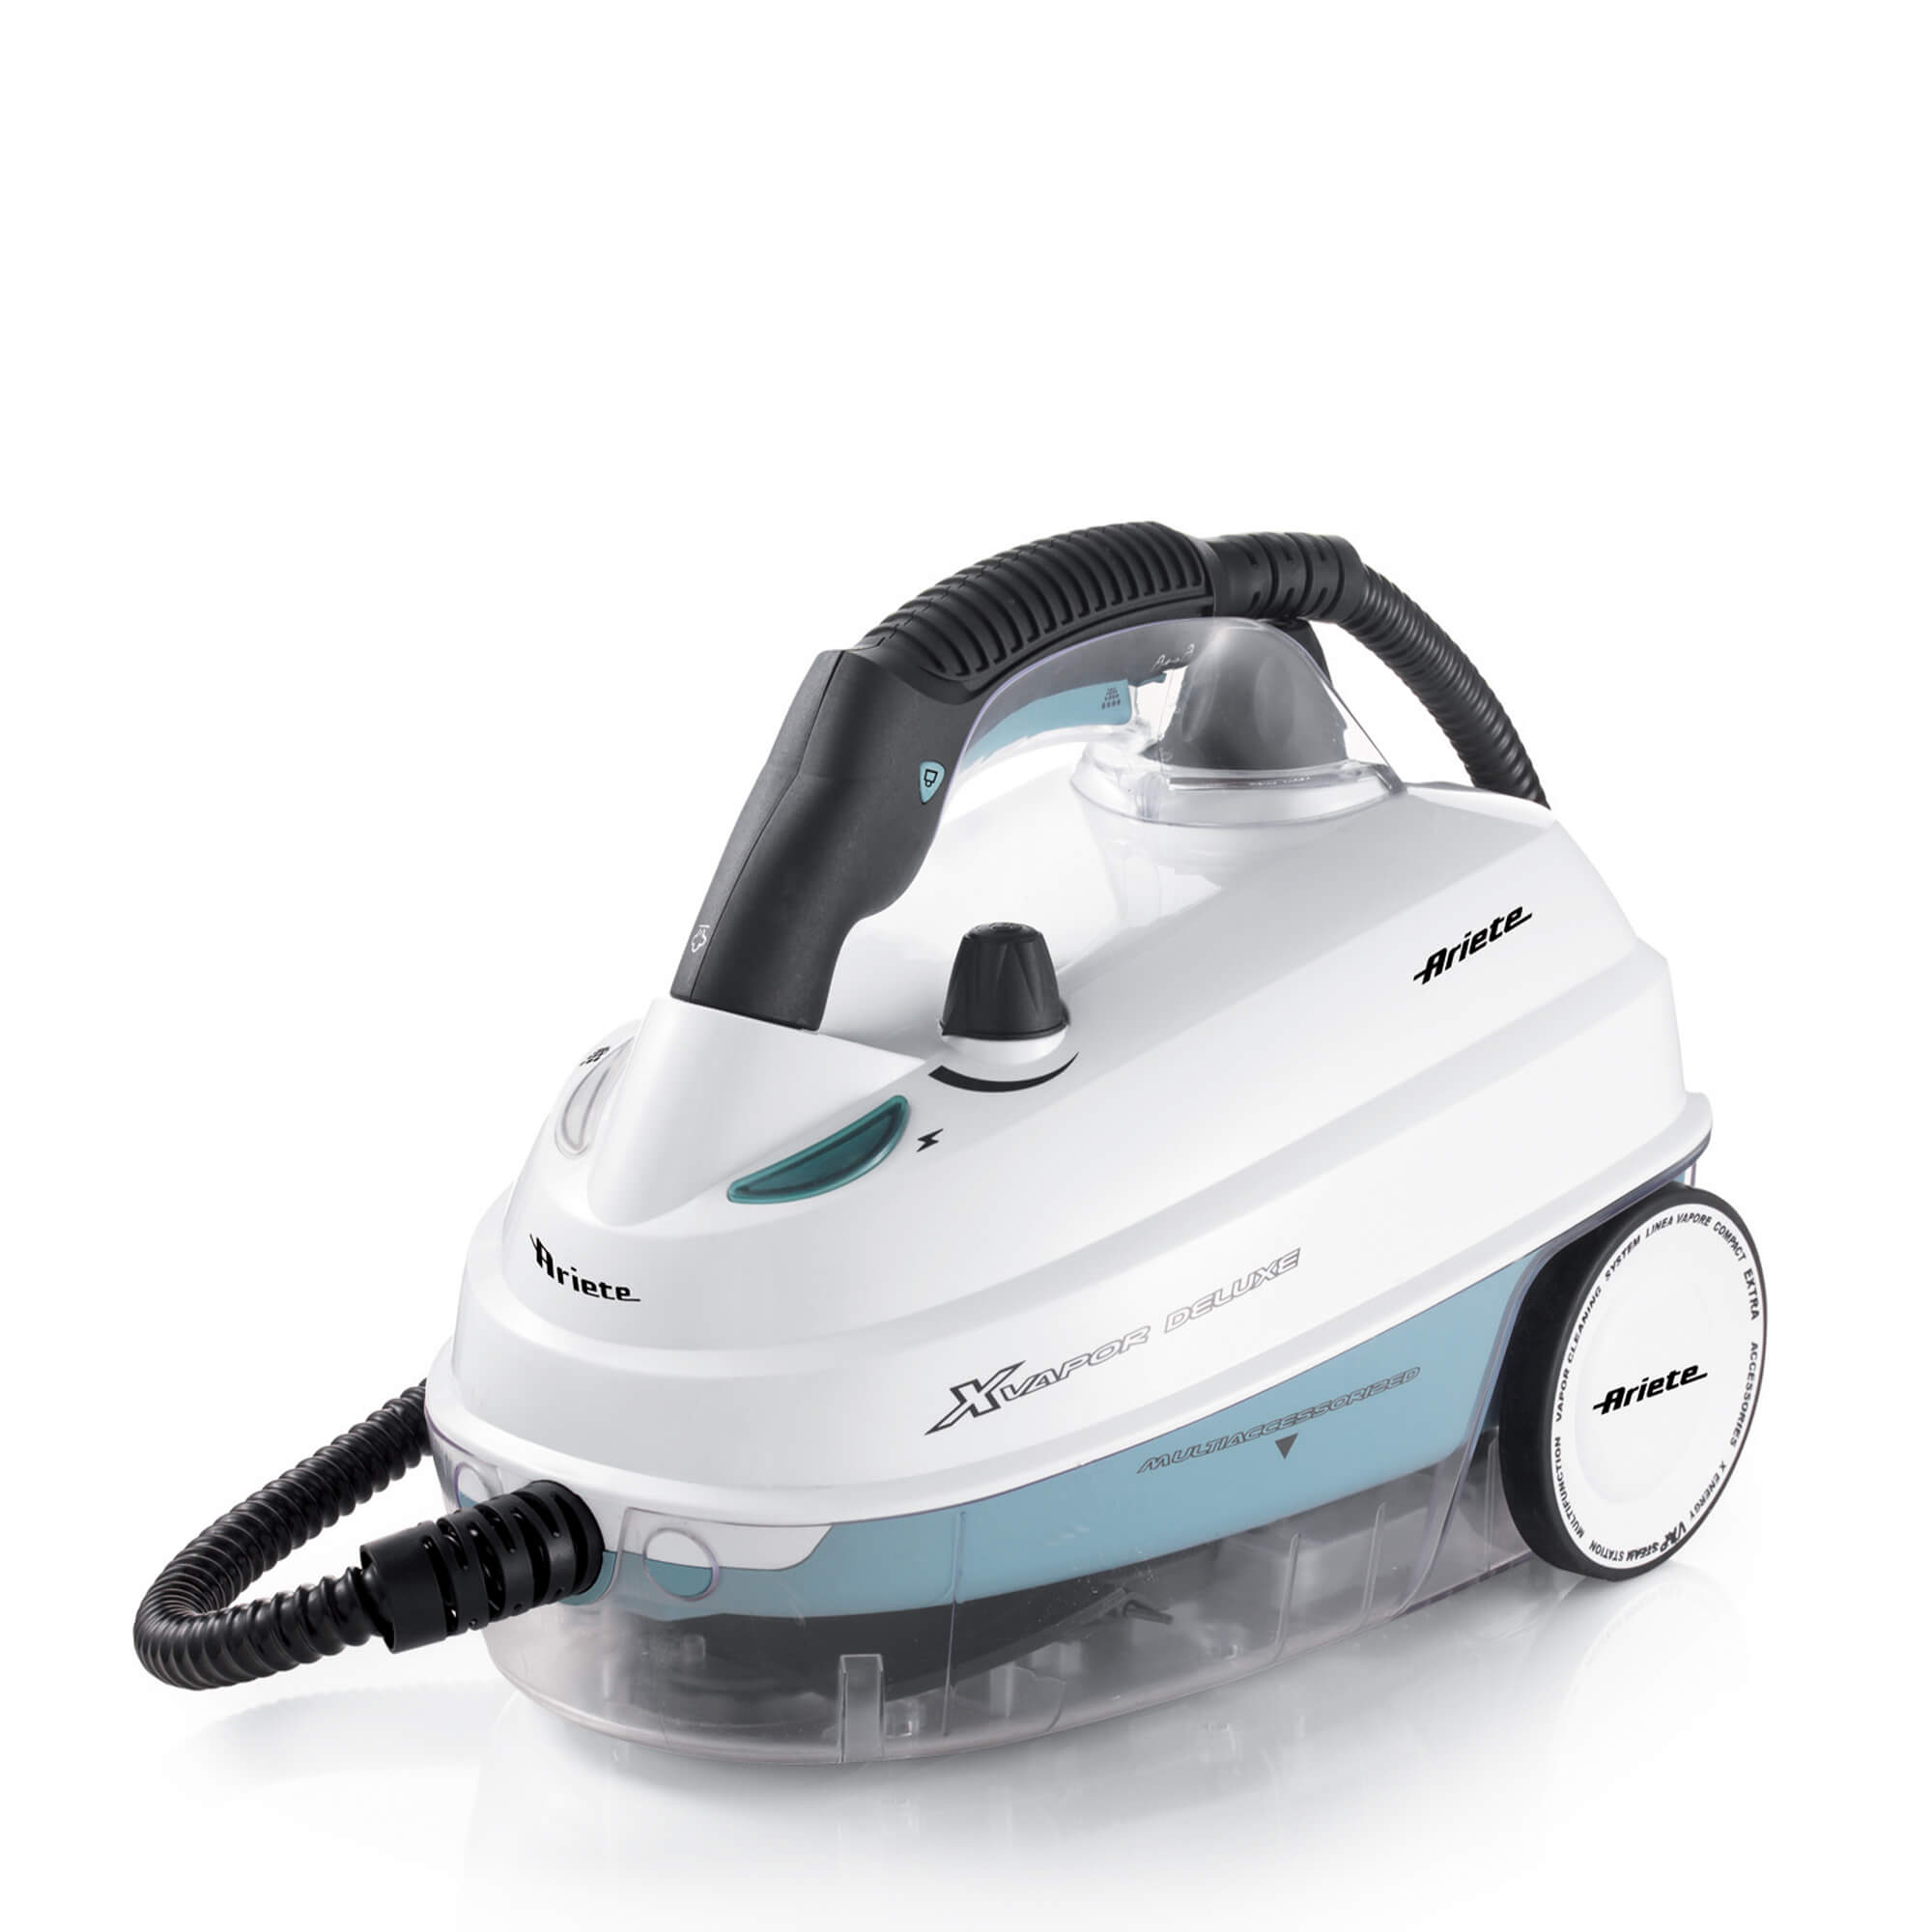 Steam cleaner to sanitize / clean the house | XVapor Deluxe | Ariete